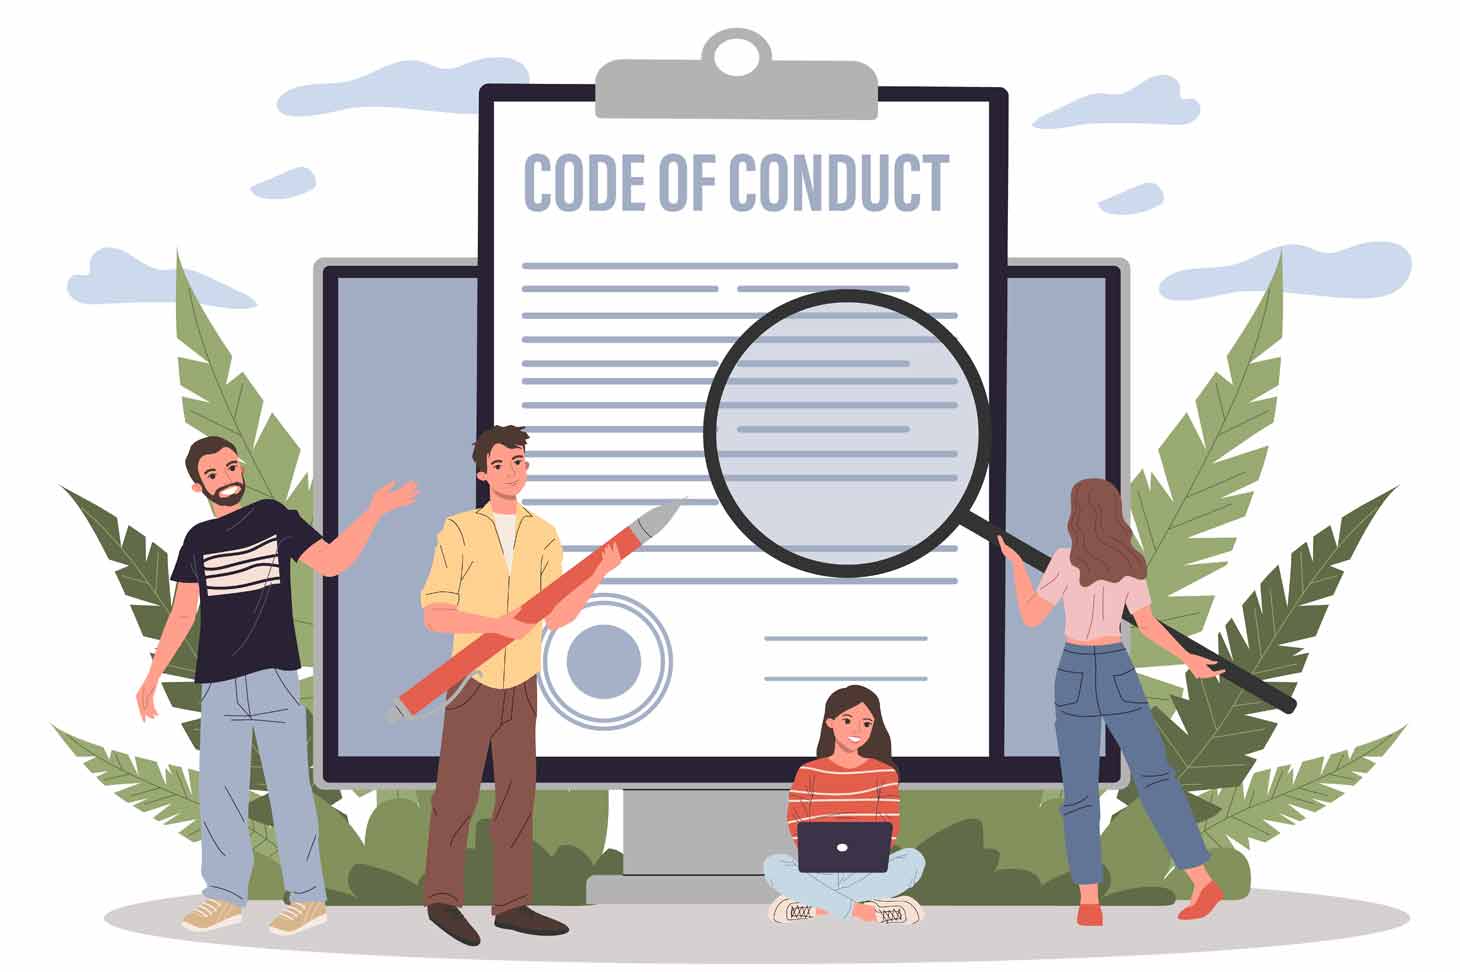 Illustration Code of Conduct with illustrated people, one holding a giant magnifying glass and one holding a giant pen